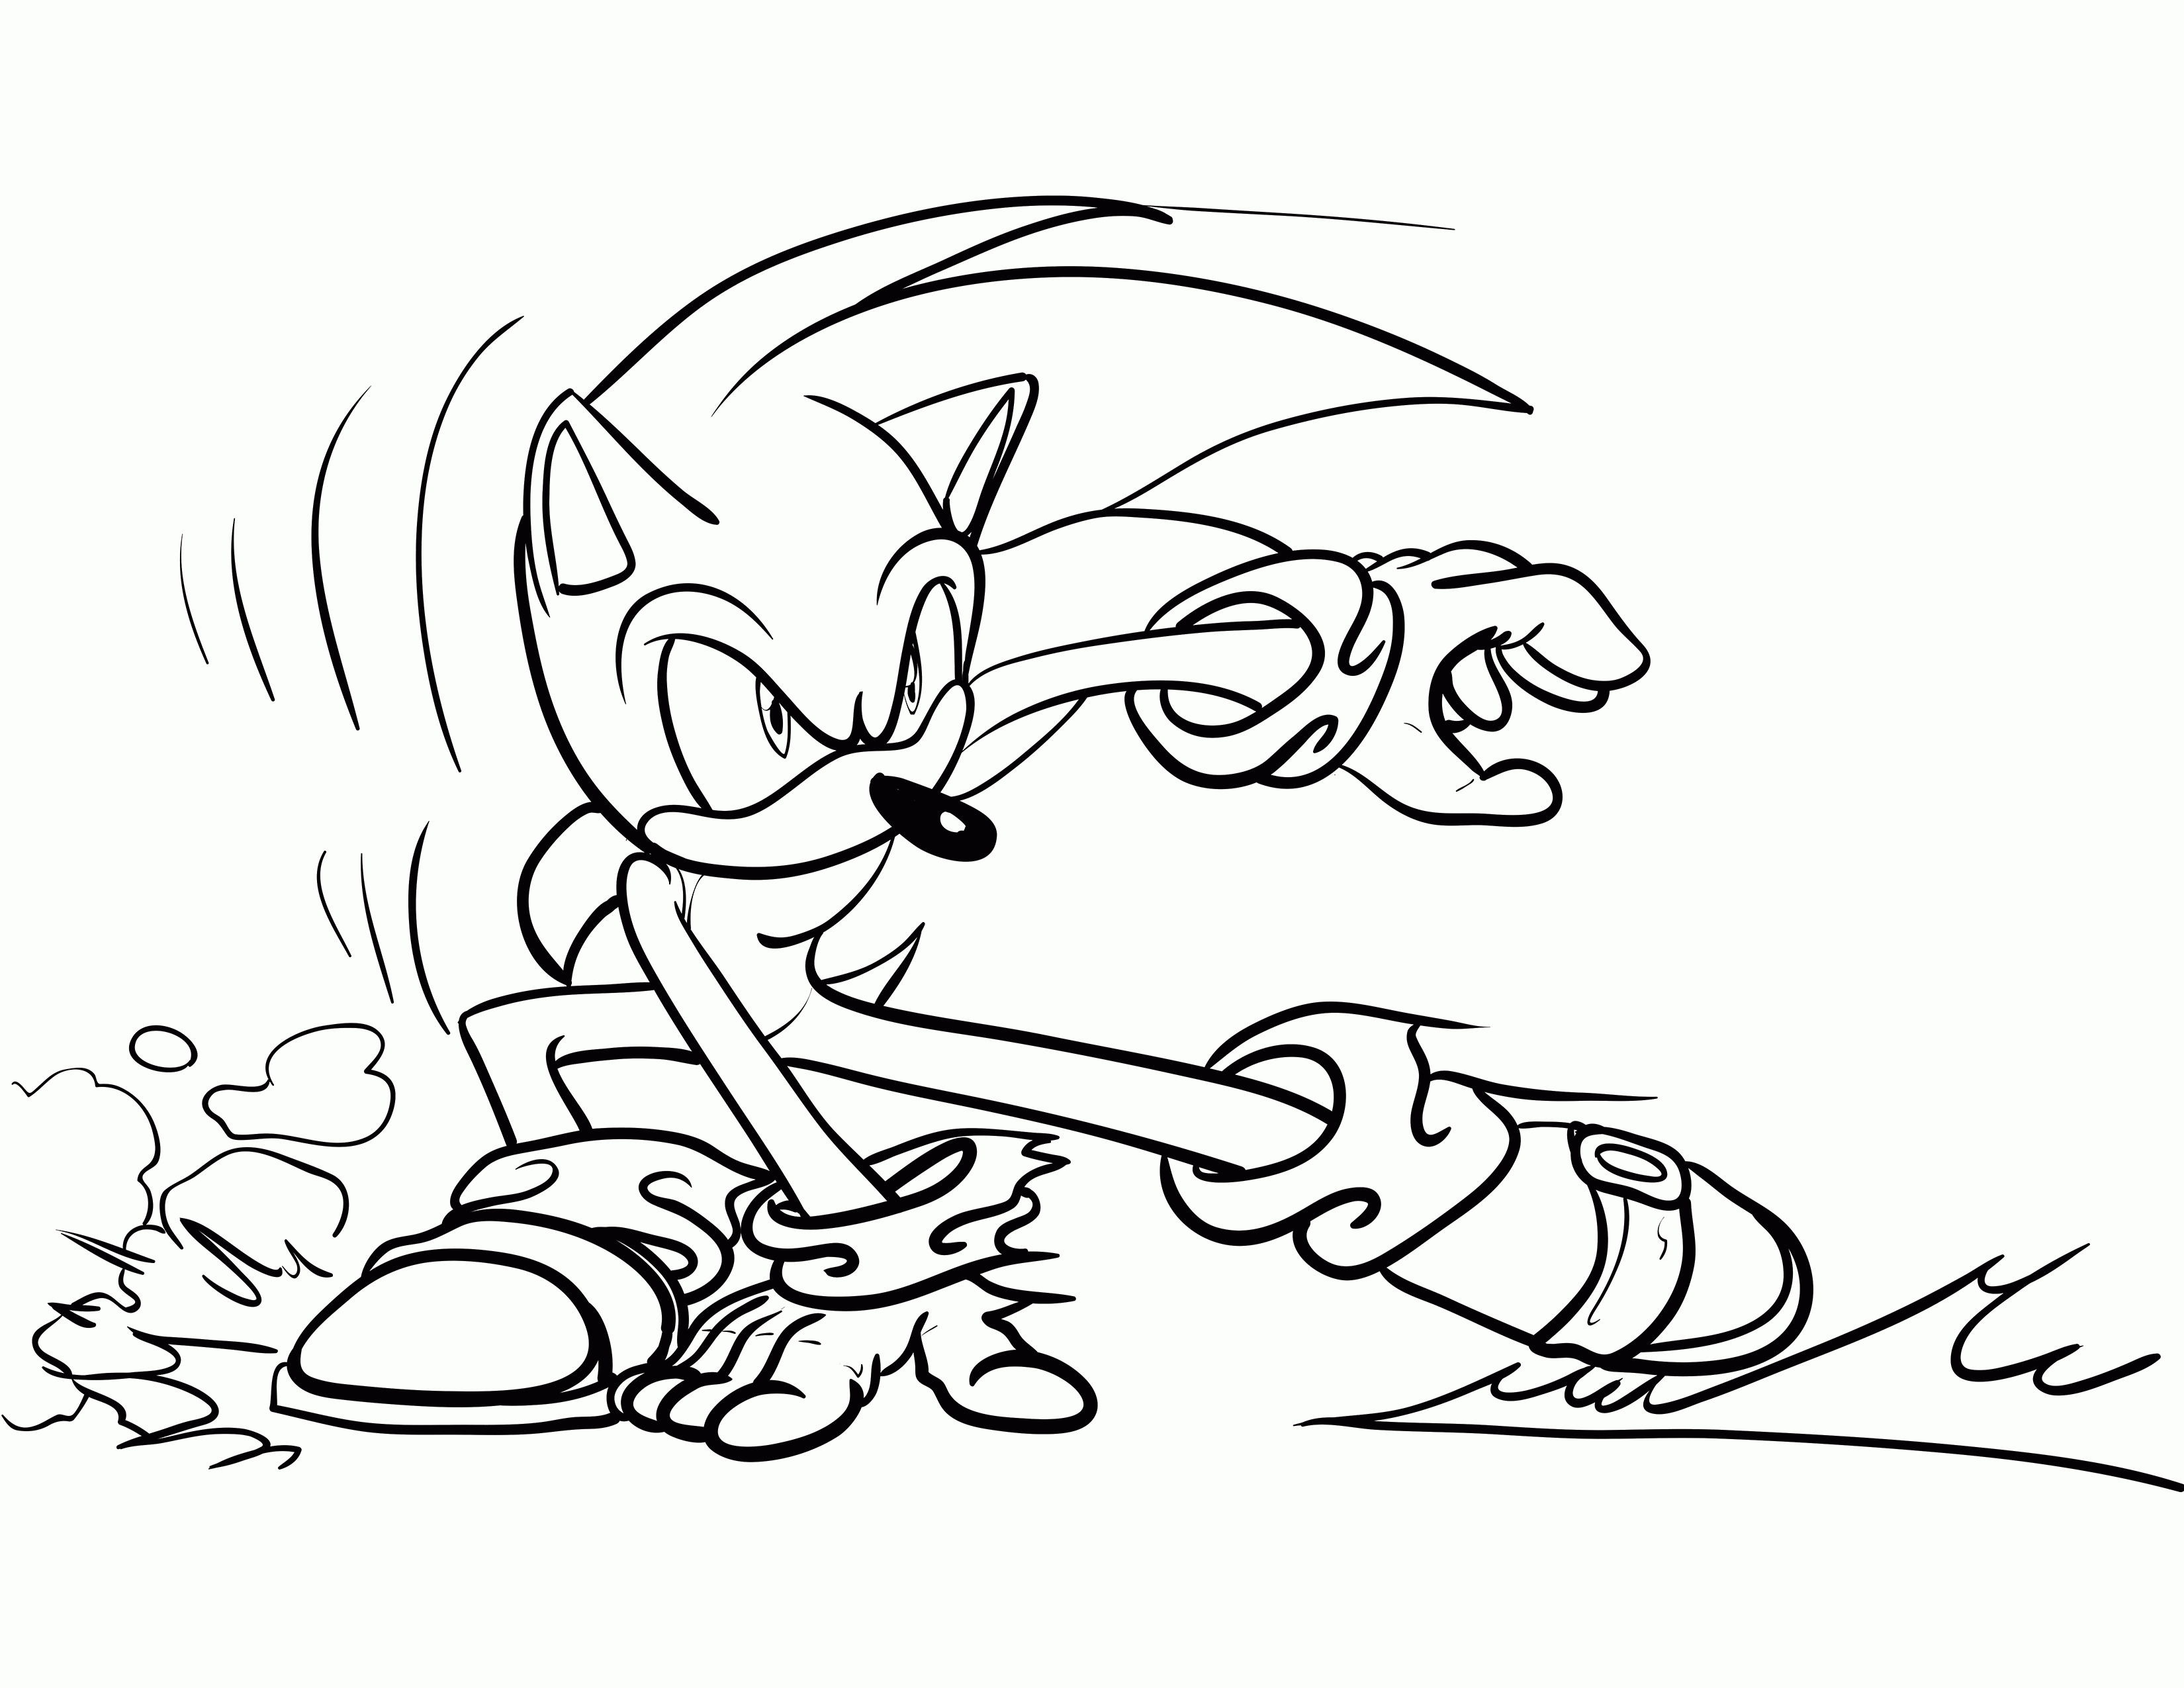 coloring page 1 - Sonic the Hedgehog (1) by Xaolin26 on DeviantArt